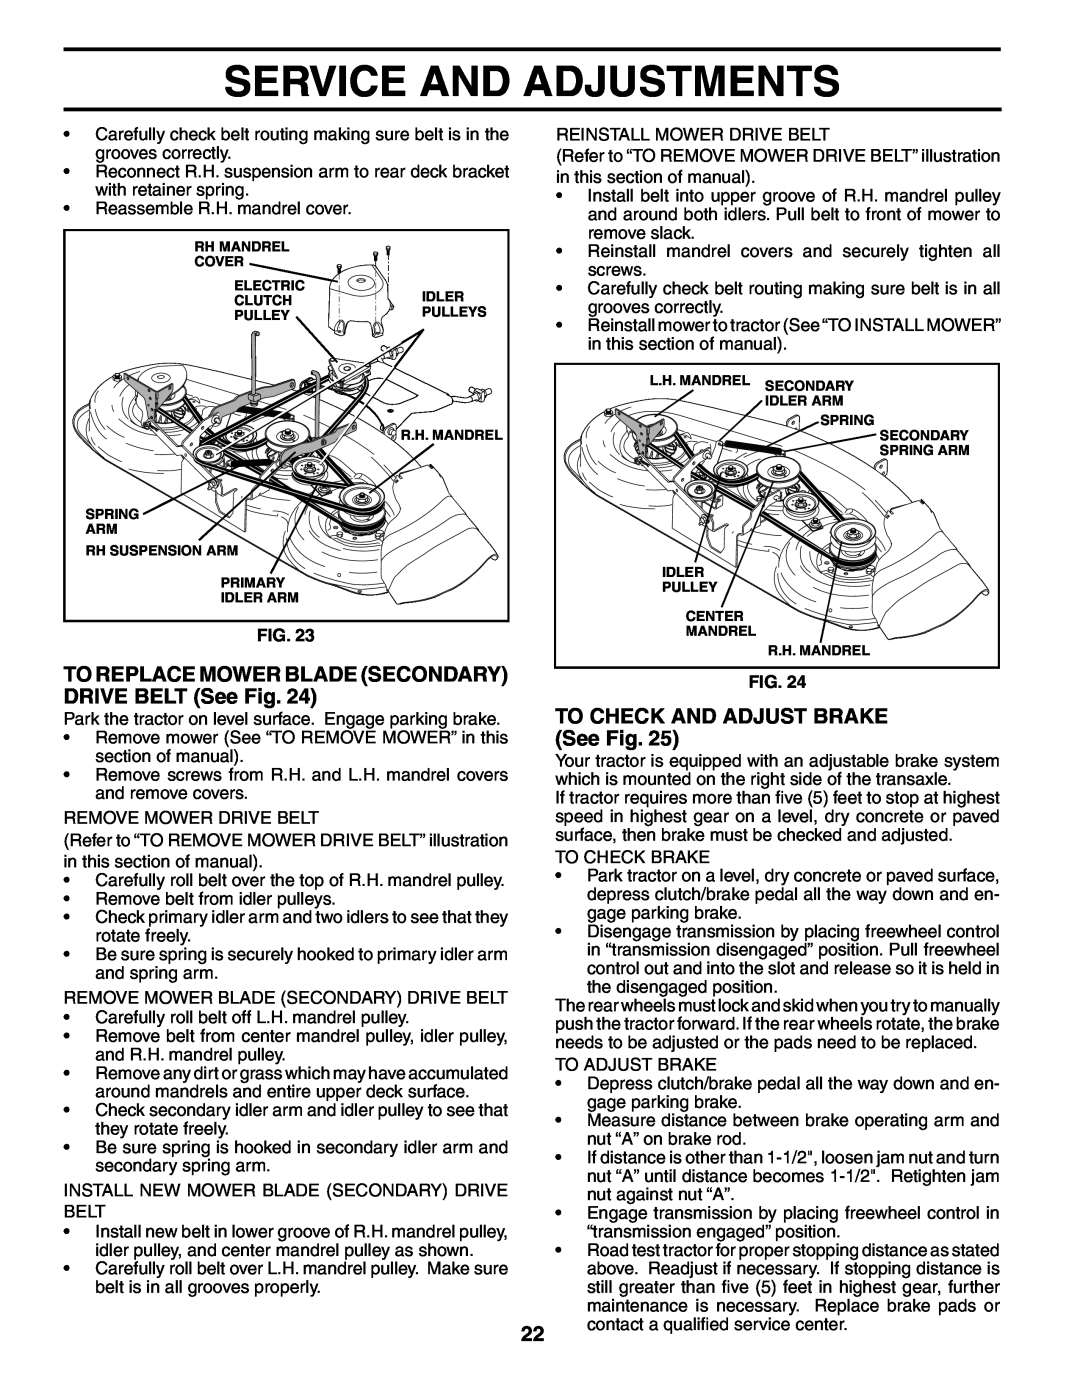 Poulan 954569455, 184425 manual TO REPLACE MOWER BLADE SECONDARY DRIVE BELT See Fig, TO CHECK AND ADJUST BRAKE See Fig 